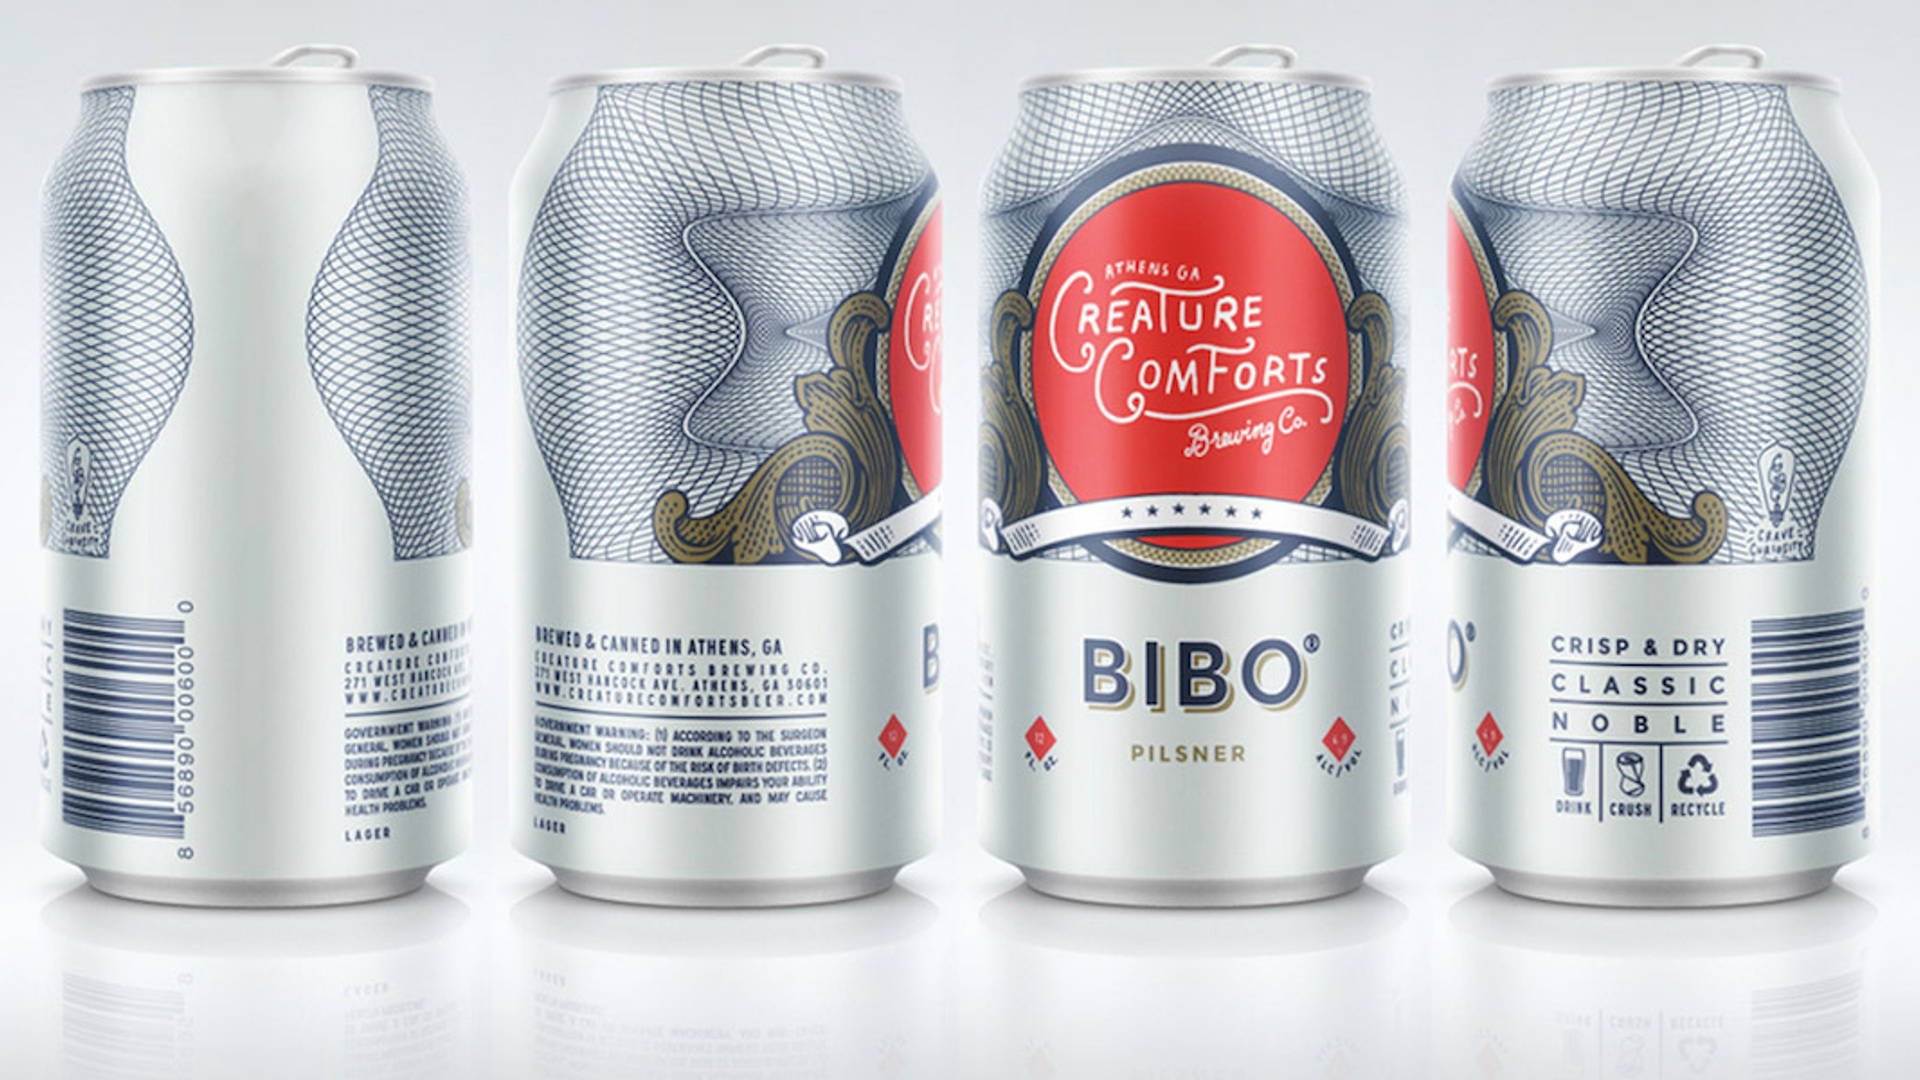 Featured image for Creature Comforts Brewing Company Bibo Pilsner